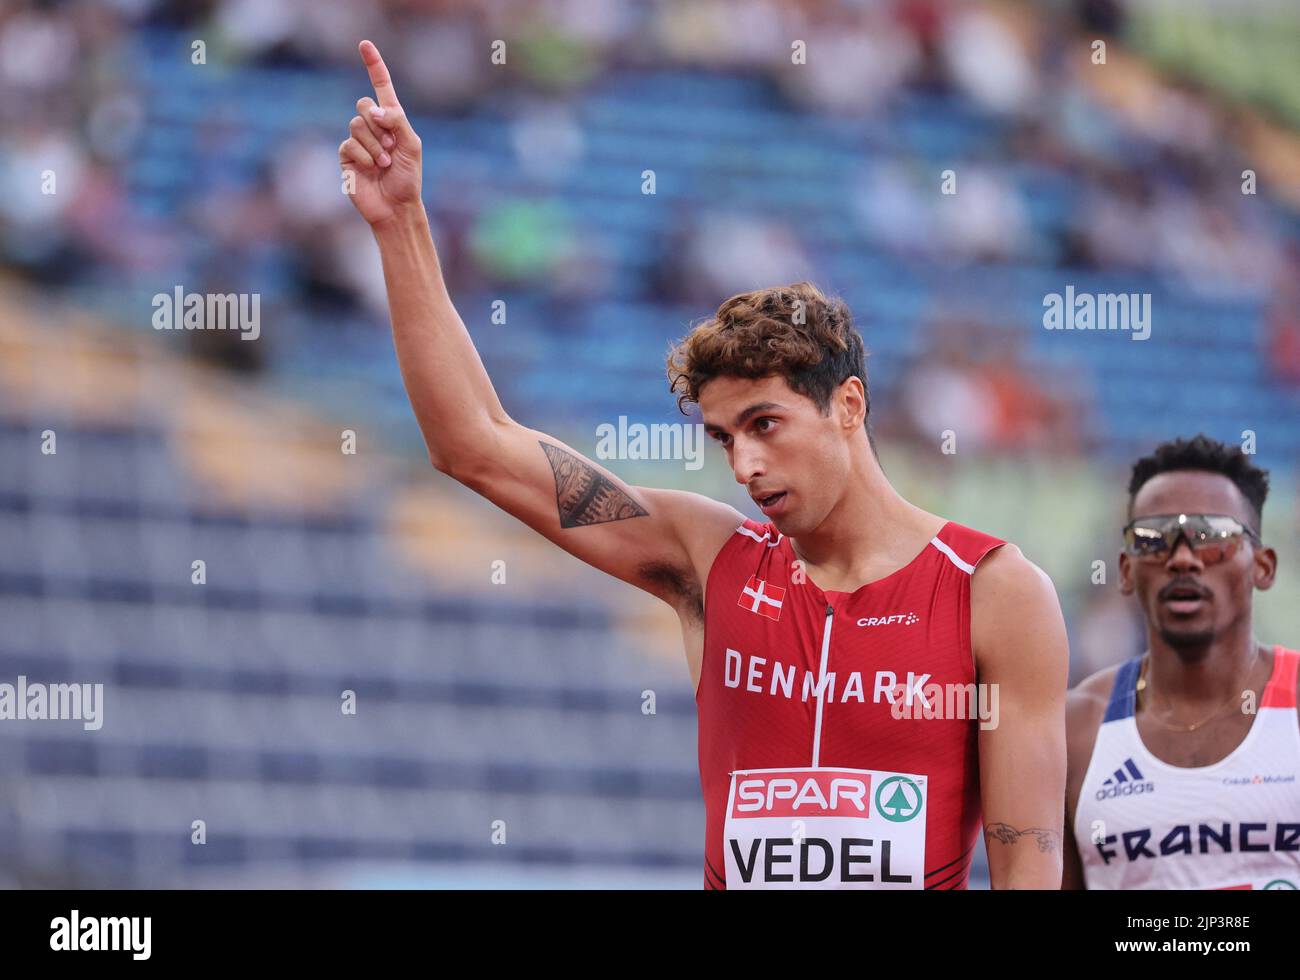 Athletics - 2022 European Championships - Olympiastadion, Munich, Germany - August 15, 2022 Denmark's Benjamin Lobo Vedel celebrates after winning the Men's 400m Round 1 Heat 3 REUTERS/Wolfgang Rattay Stock Photo